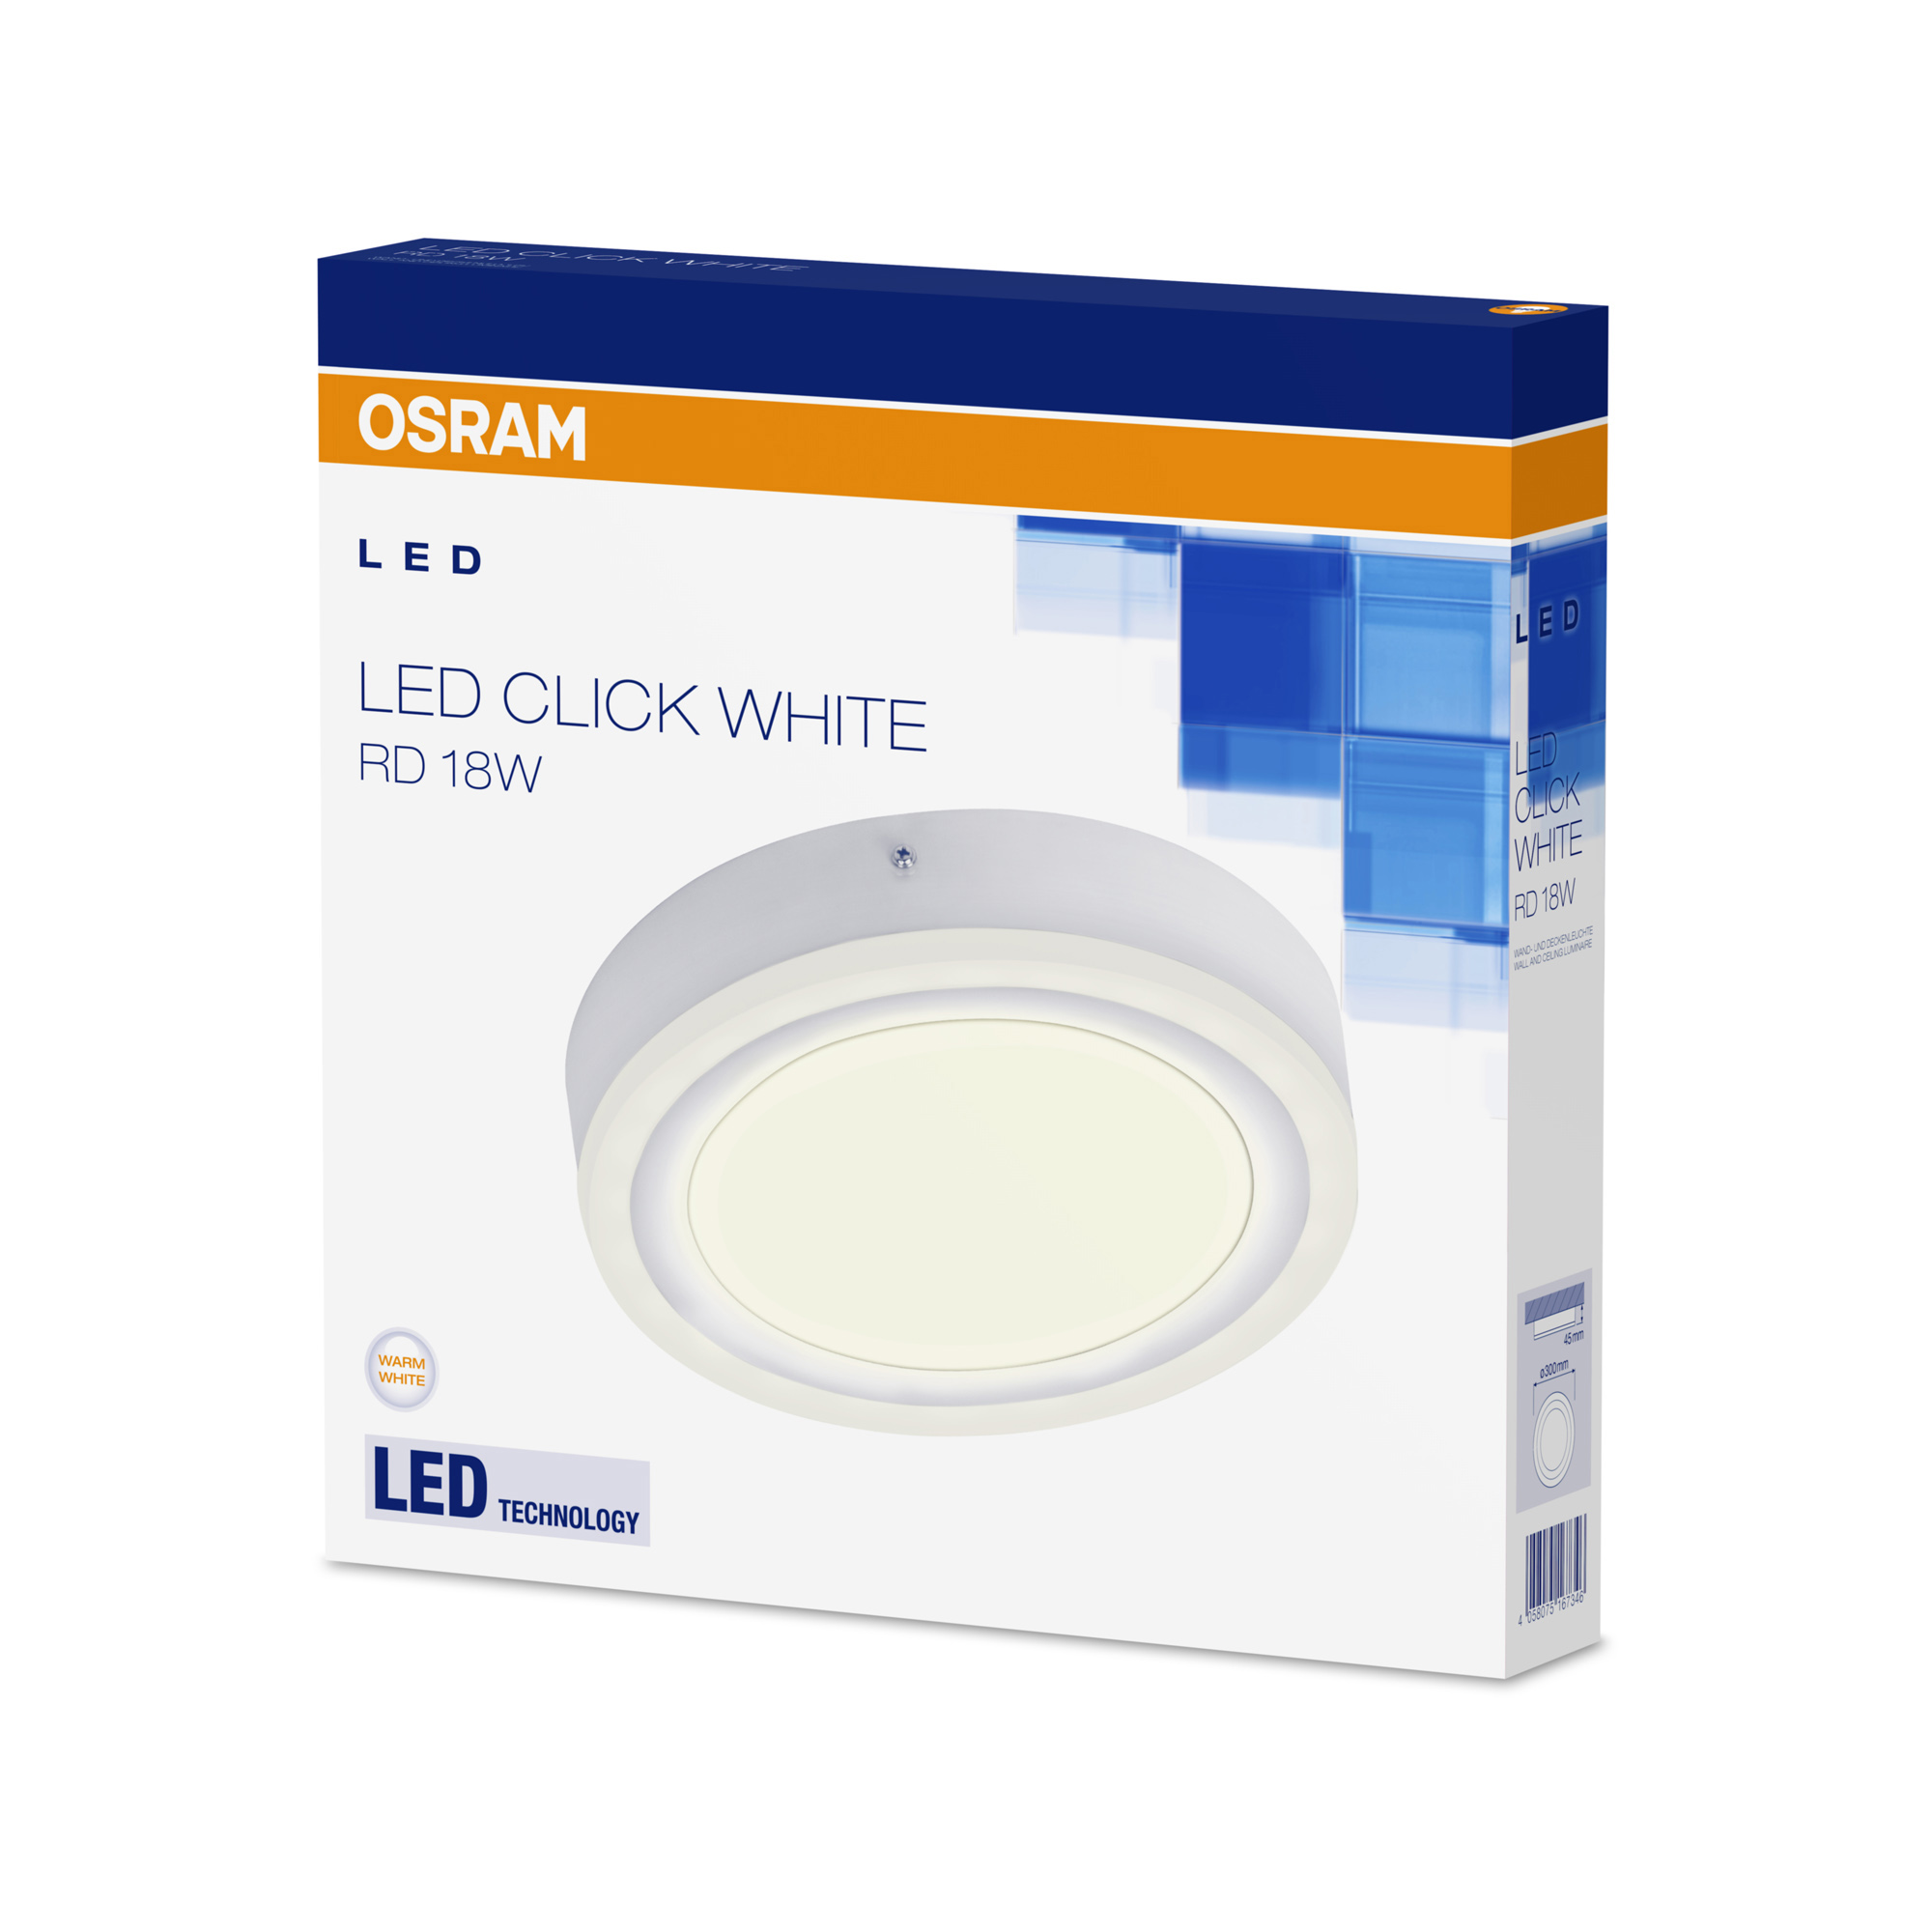 Osram LED CLICK WHITE Round Ceiling and Wall Luminaire 30cm 18W 1100lm 3000K CRI80